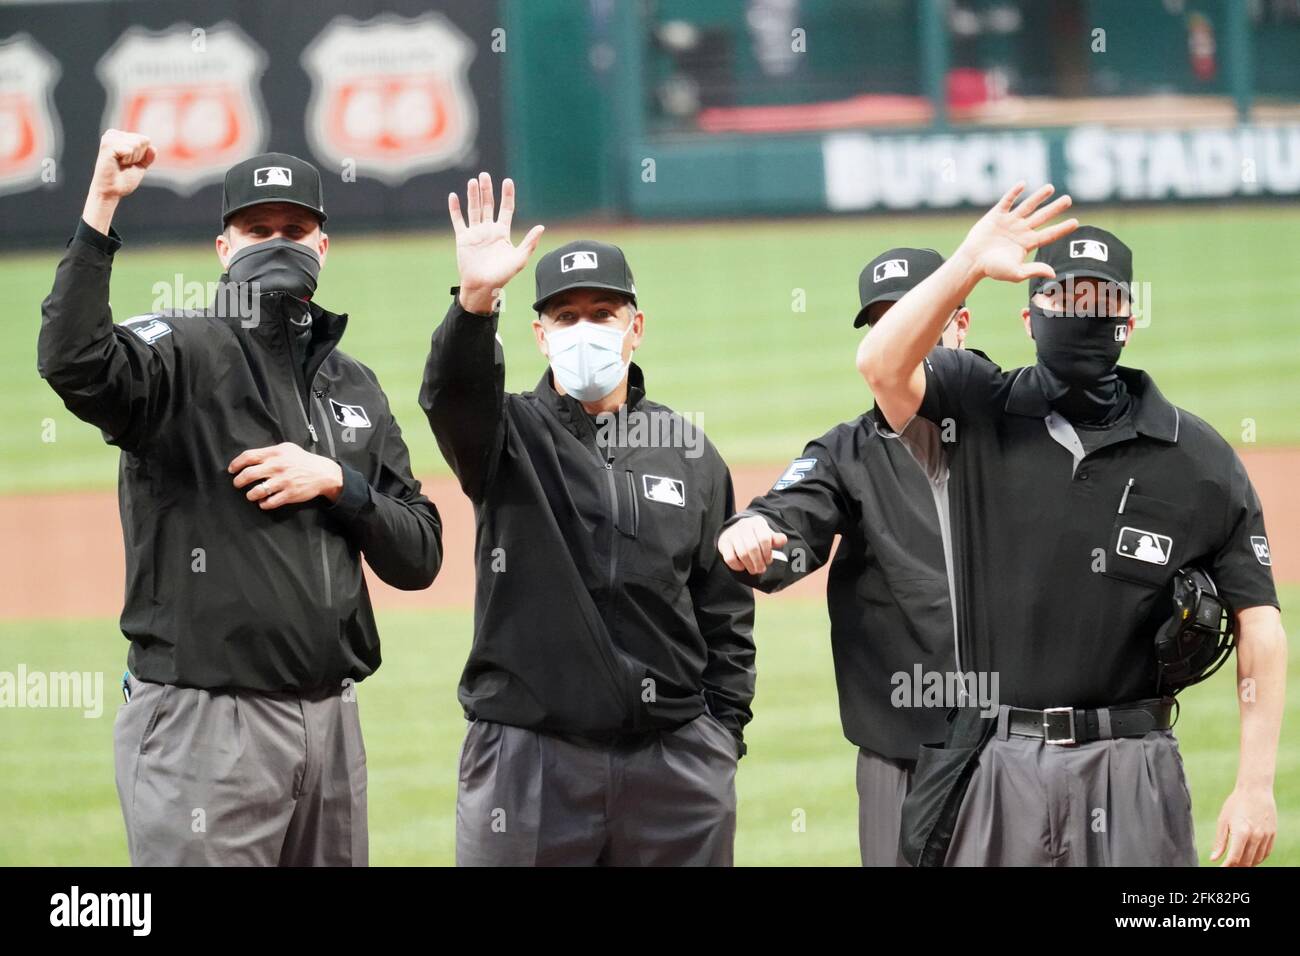 St. Louis, United States. 29th Apr, 2021. Major League Umpires (L-R) Jordan Baker, James Hoye, Brennan Miller and Chris Segal, wave to family members in the stands, before the Philadelphia Phillies-St. Louis Cardinals baseball game at Busch Stadium in St. Louis on Wednesday, April 28, 2021. Photo by Bill Greenblatt/UPI Credit: UPI/Alamy Live News Stock Photo